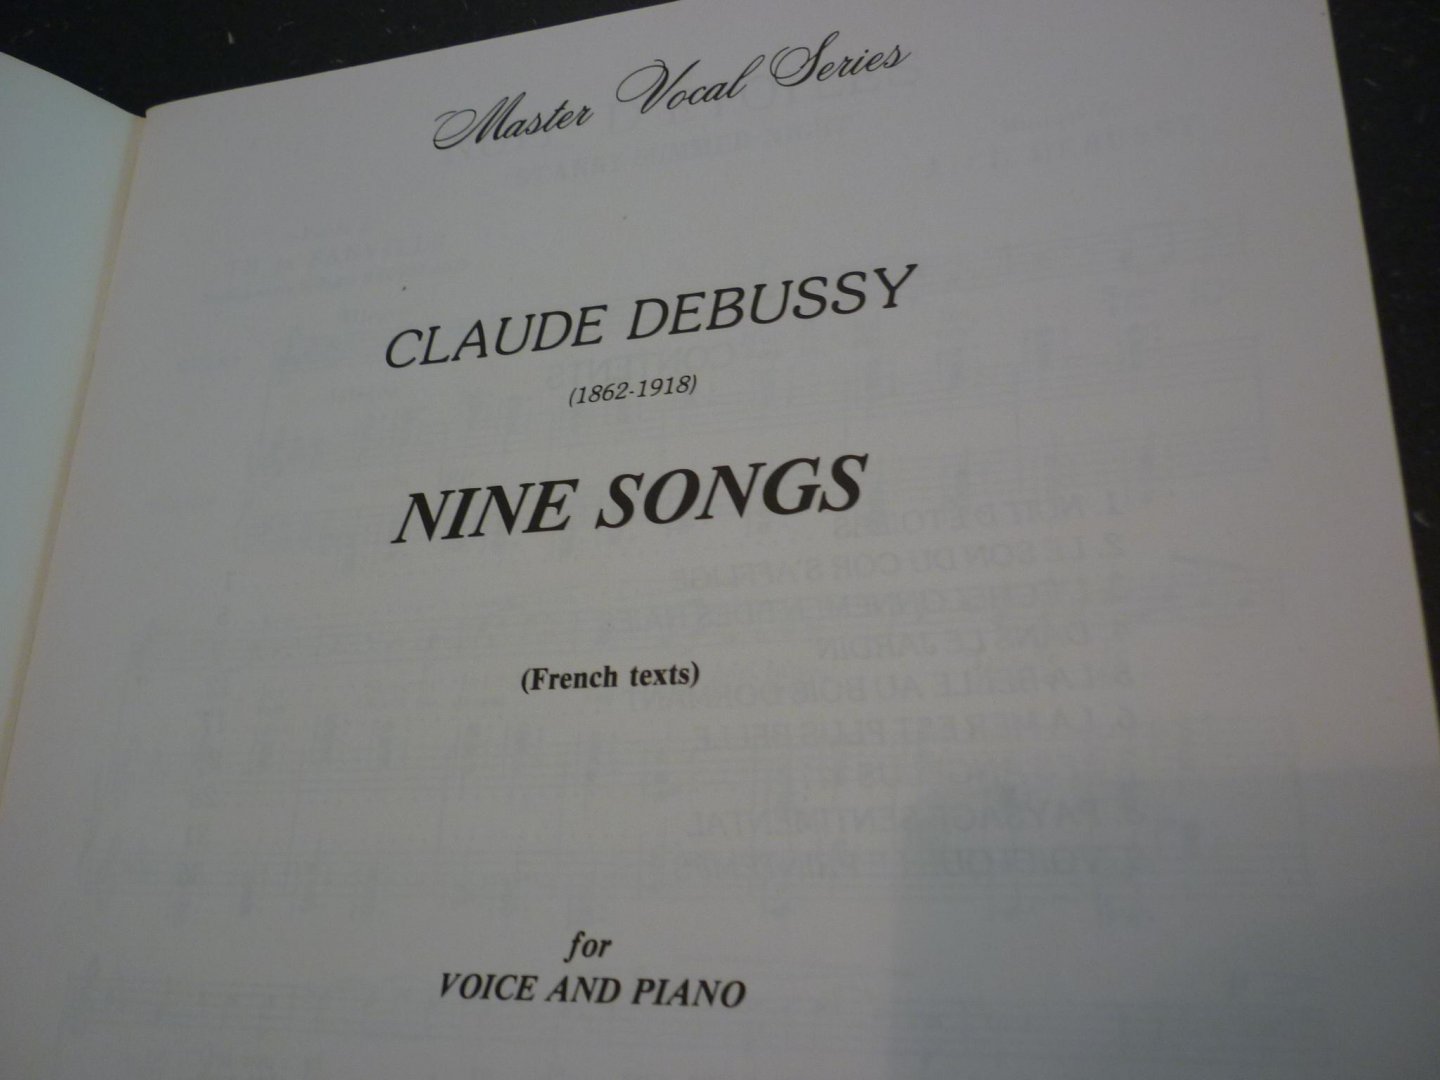 Debussy; Claude (1862-1918) - Nine songs; for voice and piano - French texts